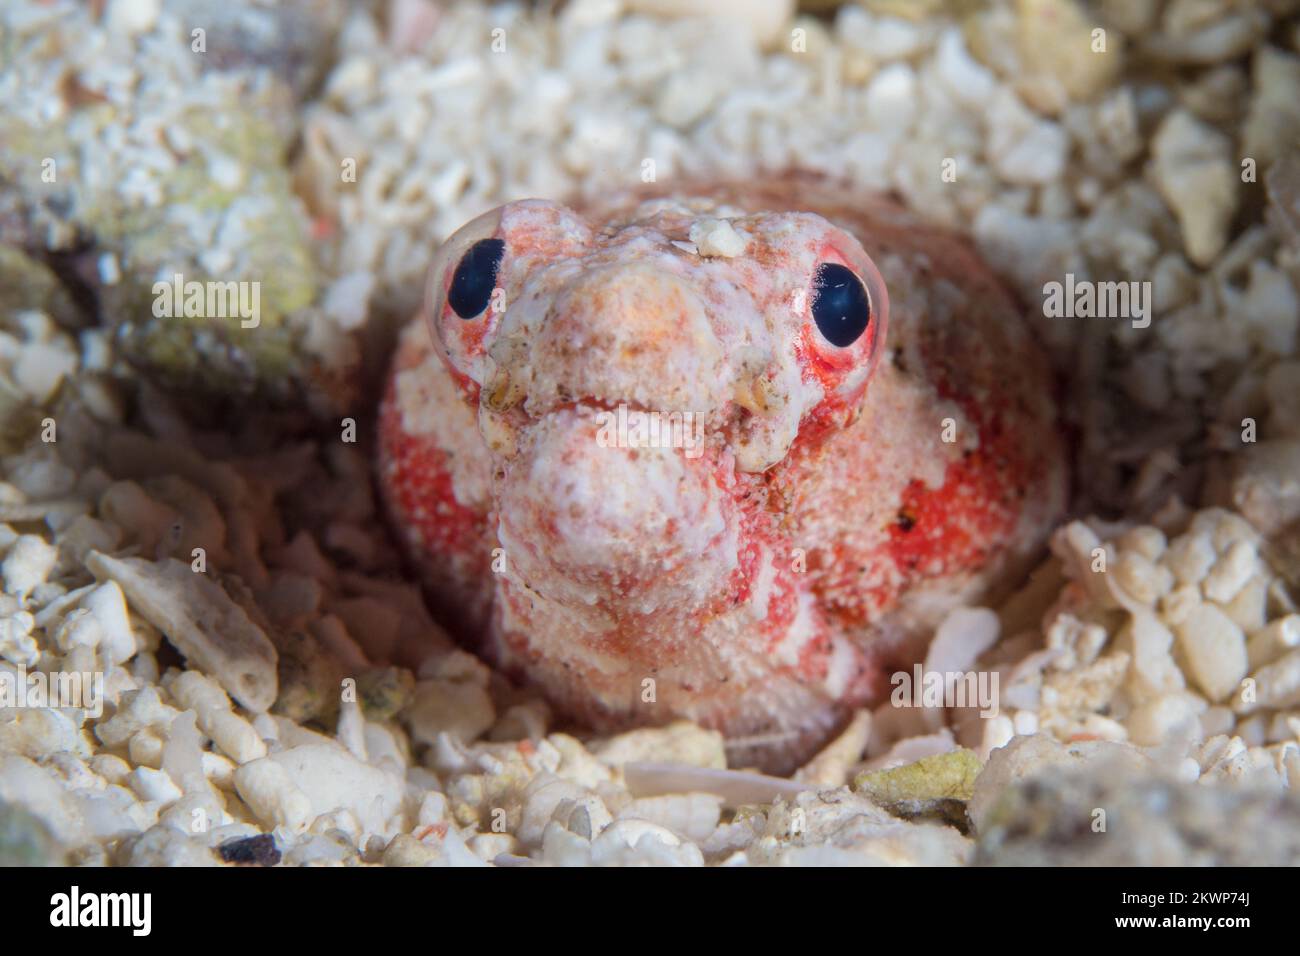 Snake ell sticking its head out from the sand at the base of coral reef Stock Photo